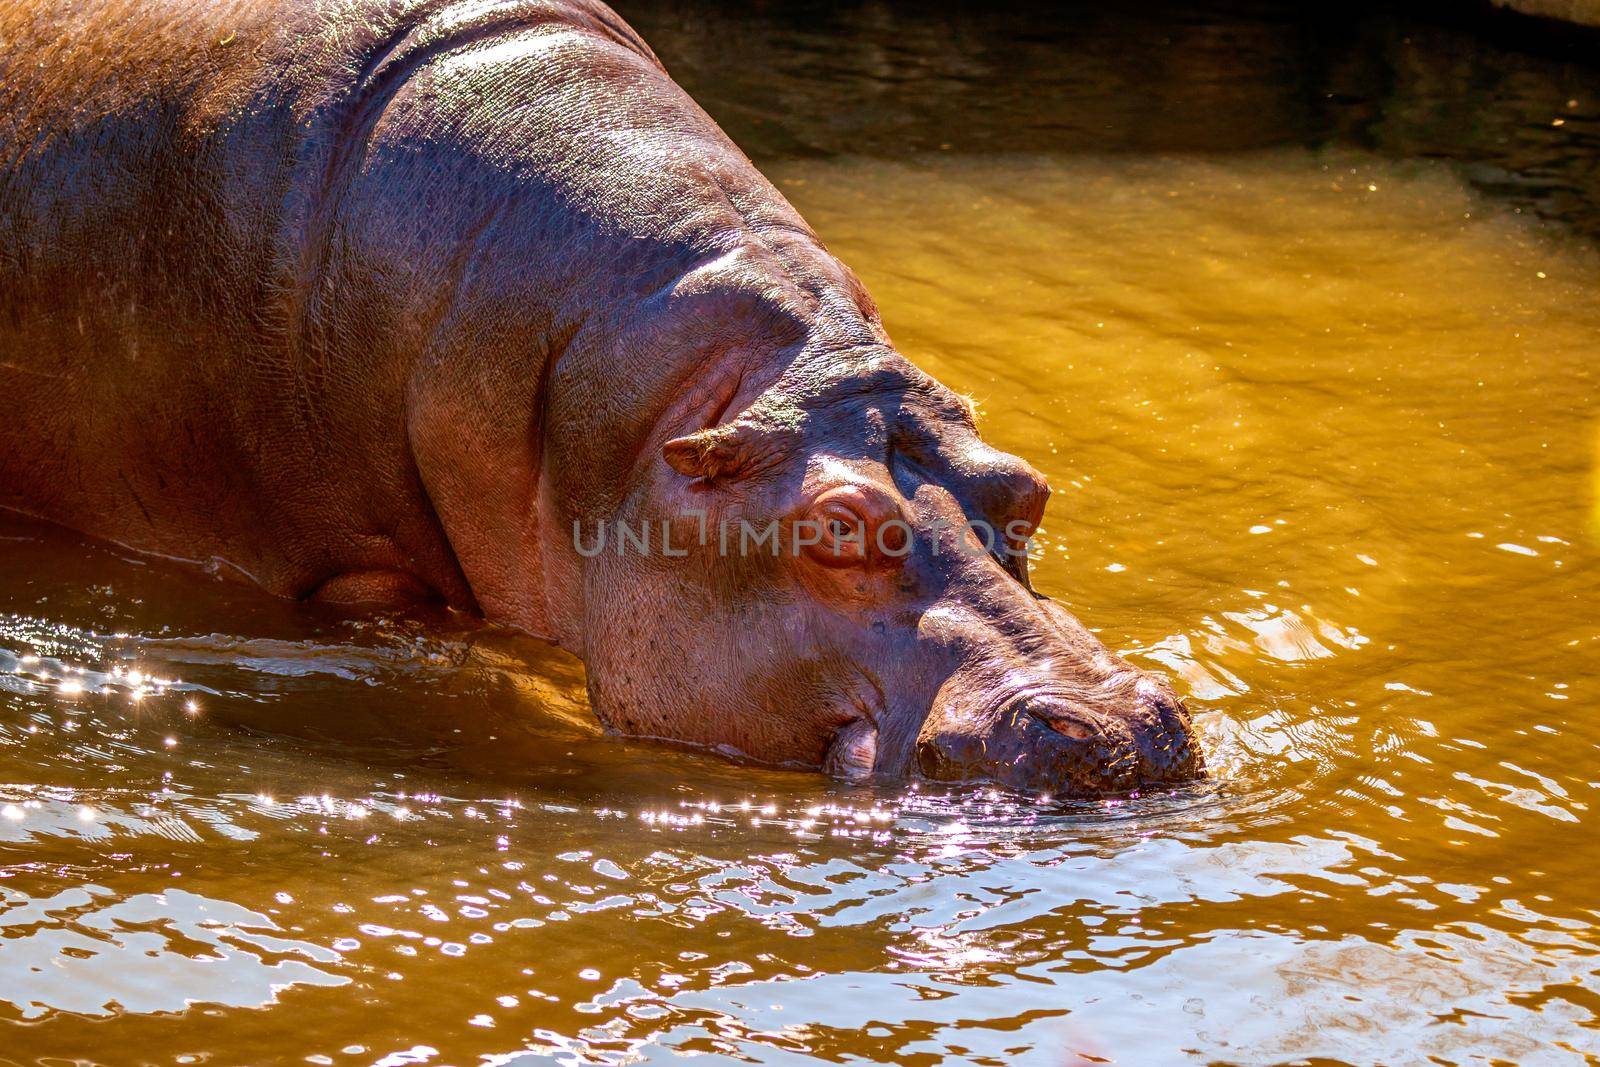 A Hippopotamus wades in water, with mouth submerges in water.